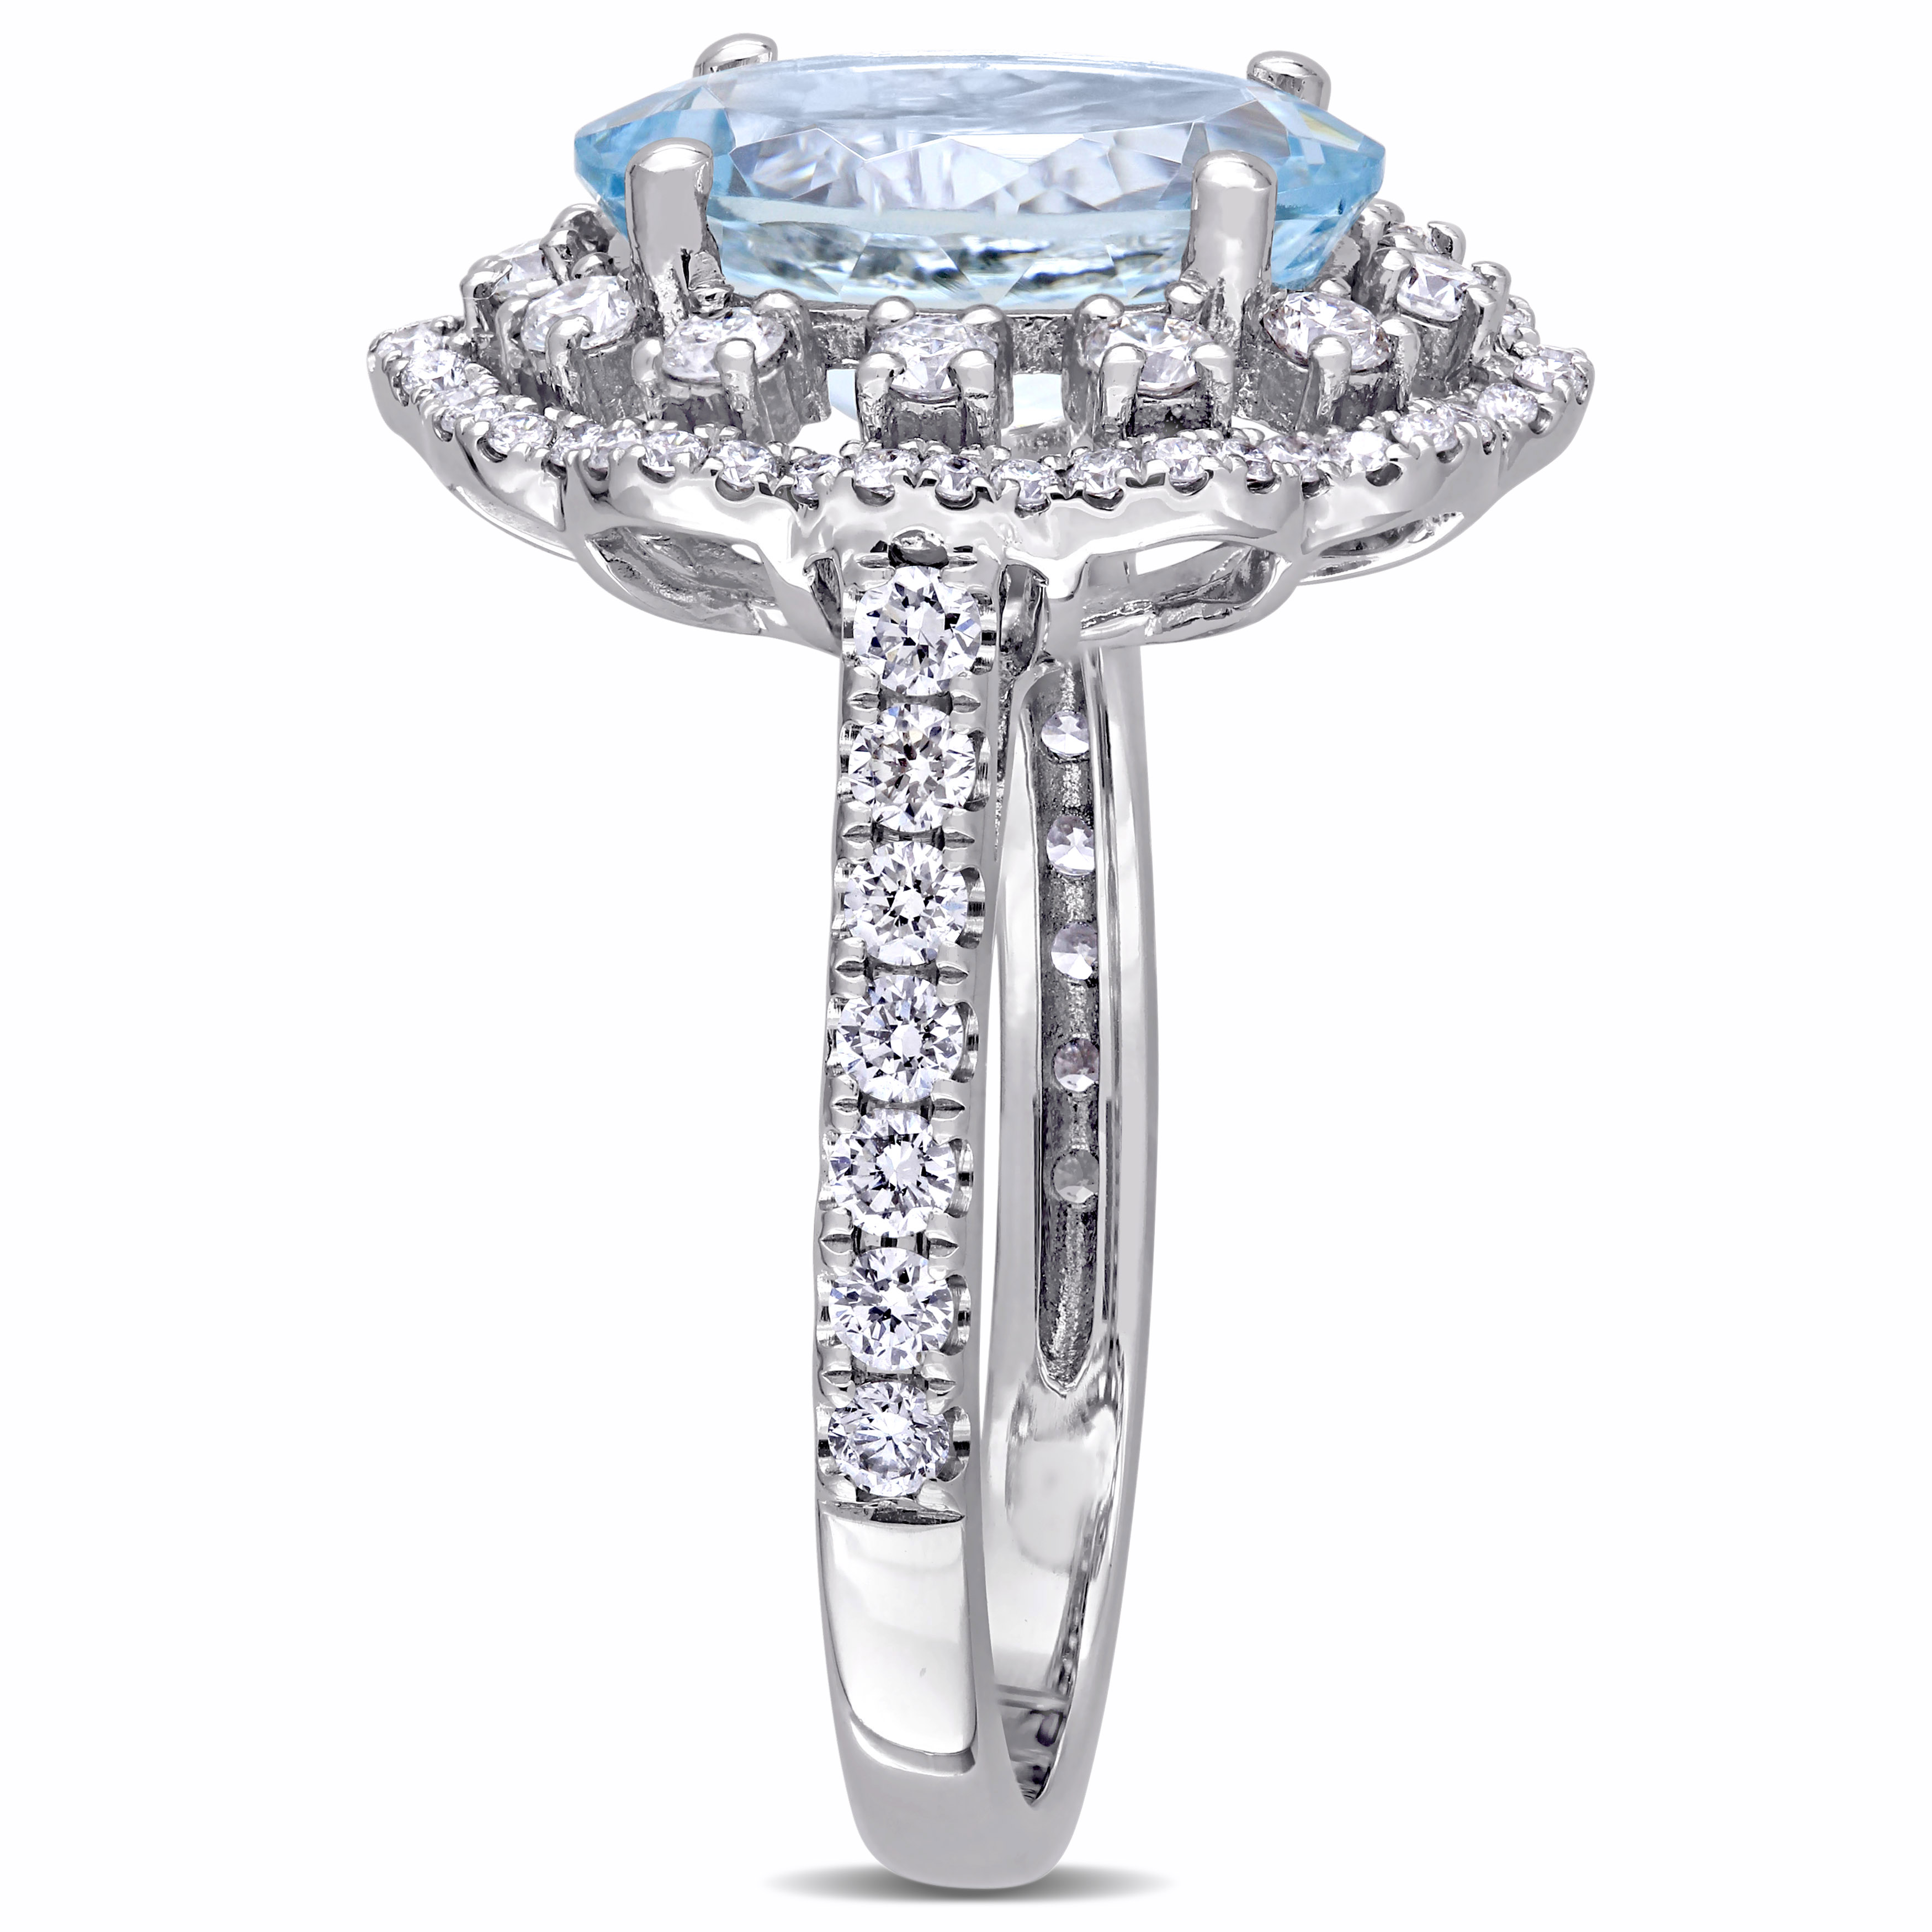 2 3/4 CT TGW Oval Cut Aquamarine and 3/4 CT TW Diamond Halo Ring in 14k White Gold